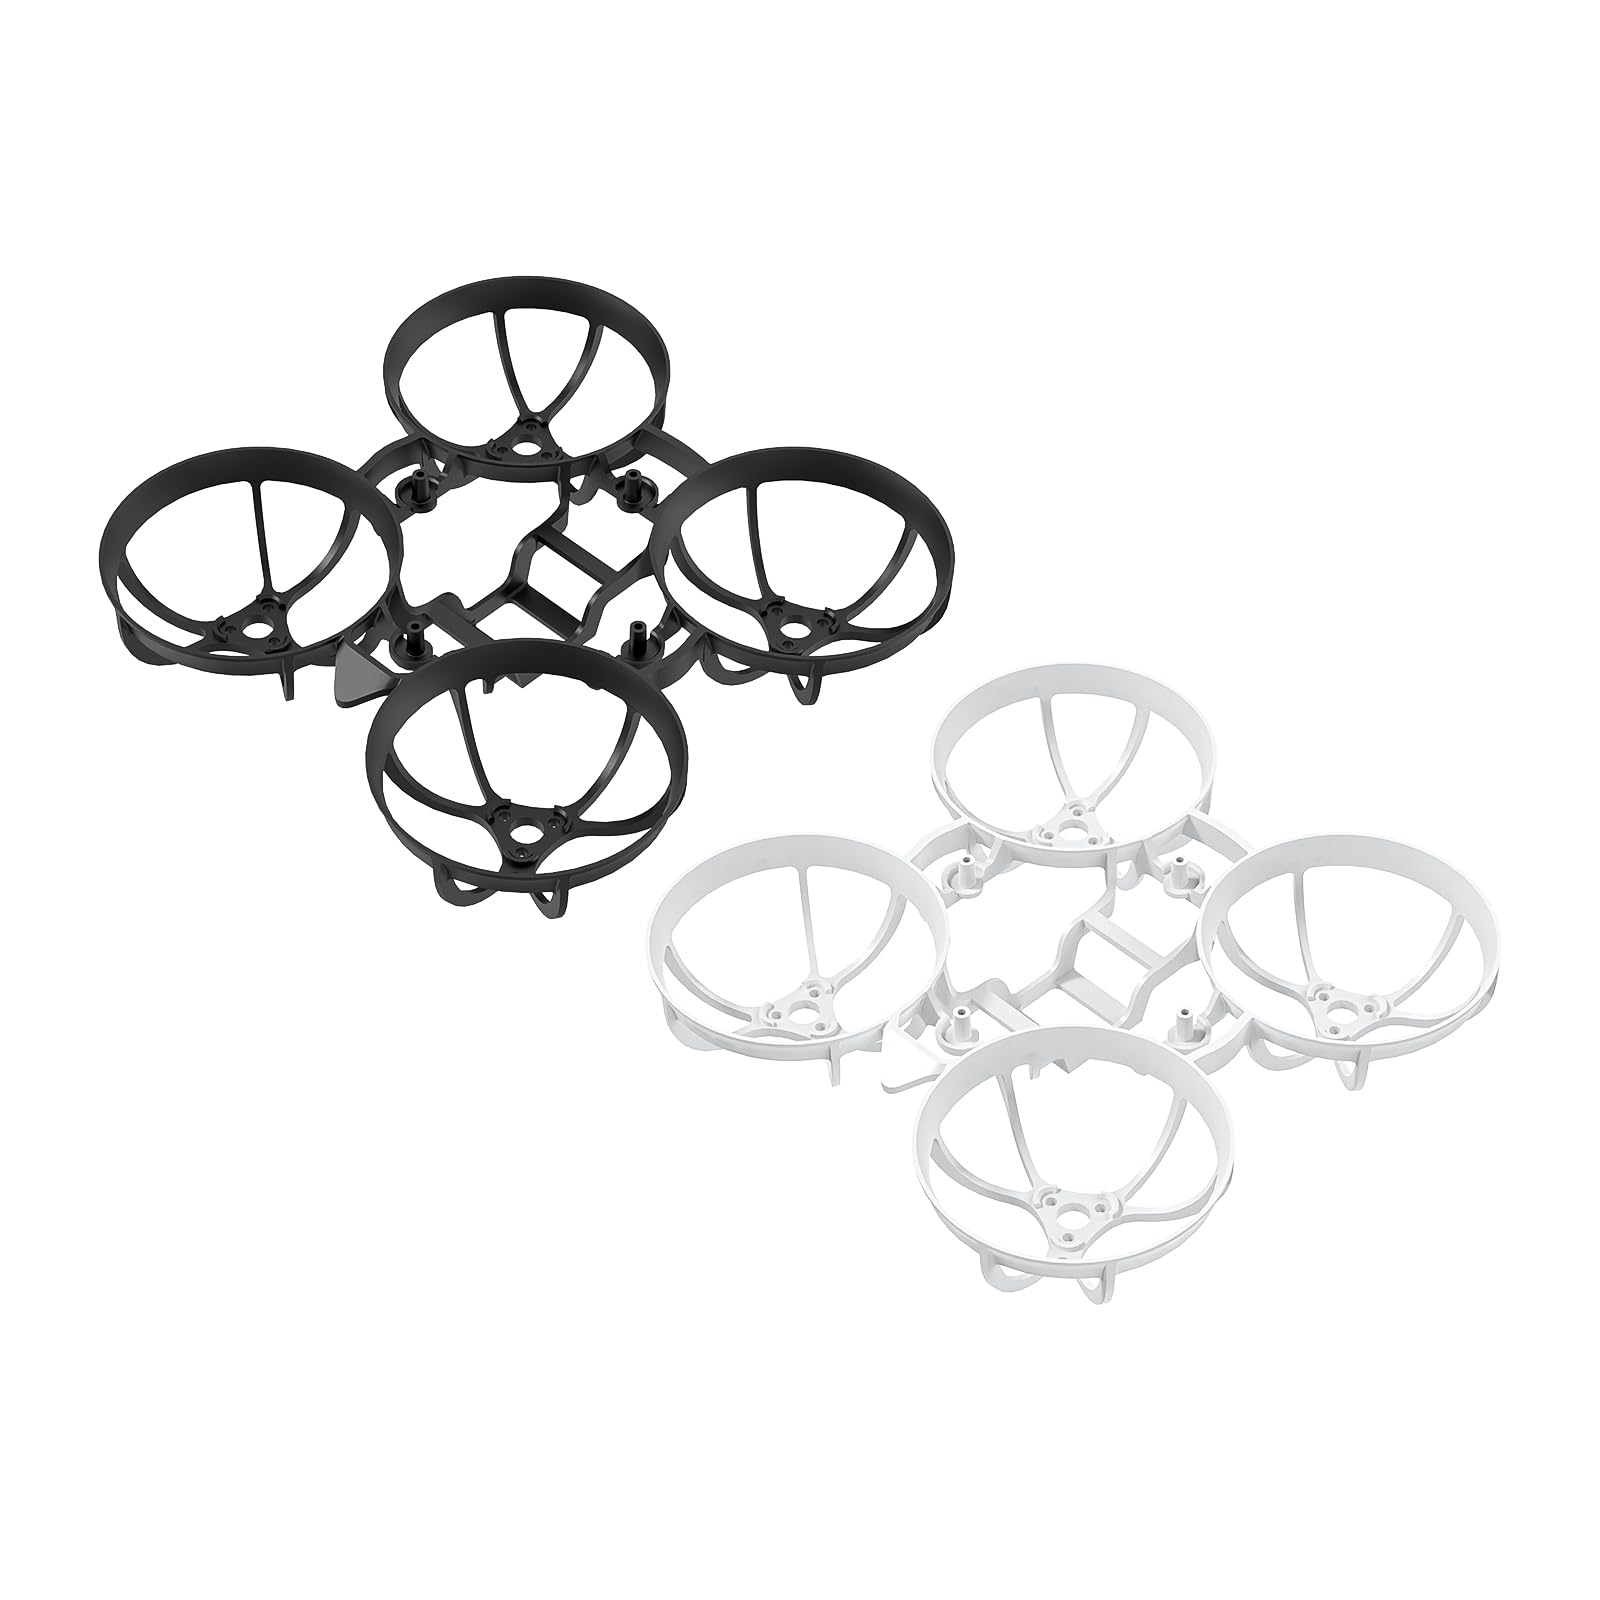 BETAFPV 2pcs Meteor65 Air Brushless Whoop Frame Kit, Ultra Light Weight, Lowered Profile, for DIY Ultra Light 65mm 1S Racing Whoop Drone Quadcopter with 07XX 08XX Series Motors 31mm Propellers von BETAFPV